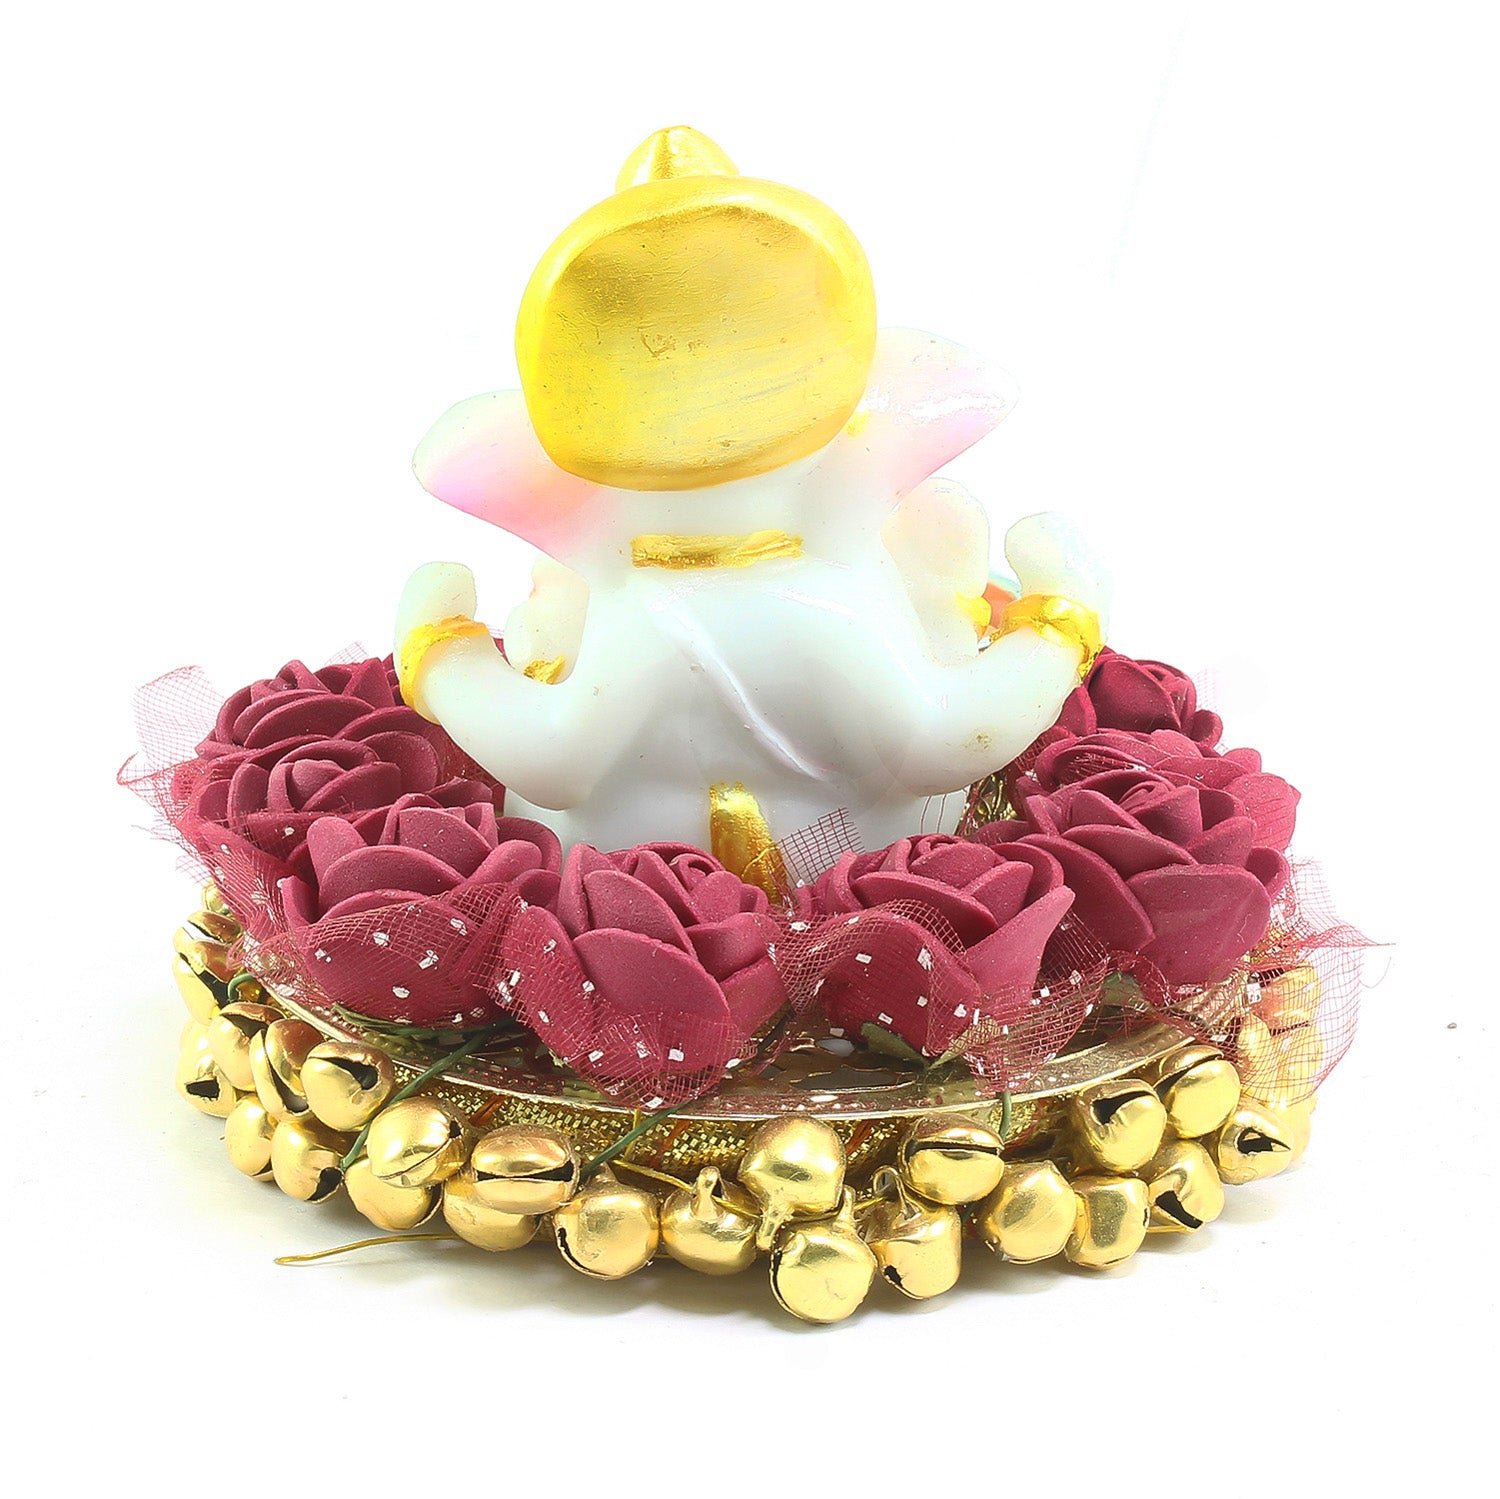 Metal and Polyresin Lord Ganesha Idol on Decorative Plate with Tea Light Candle Holder 5